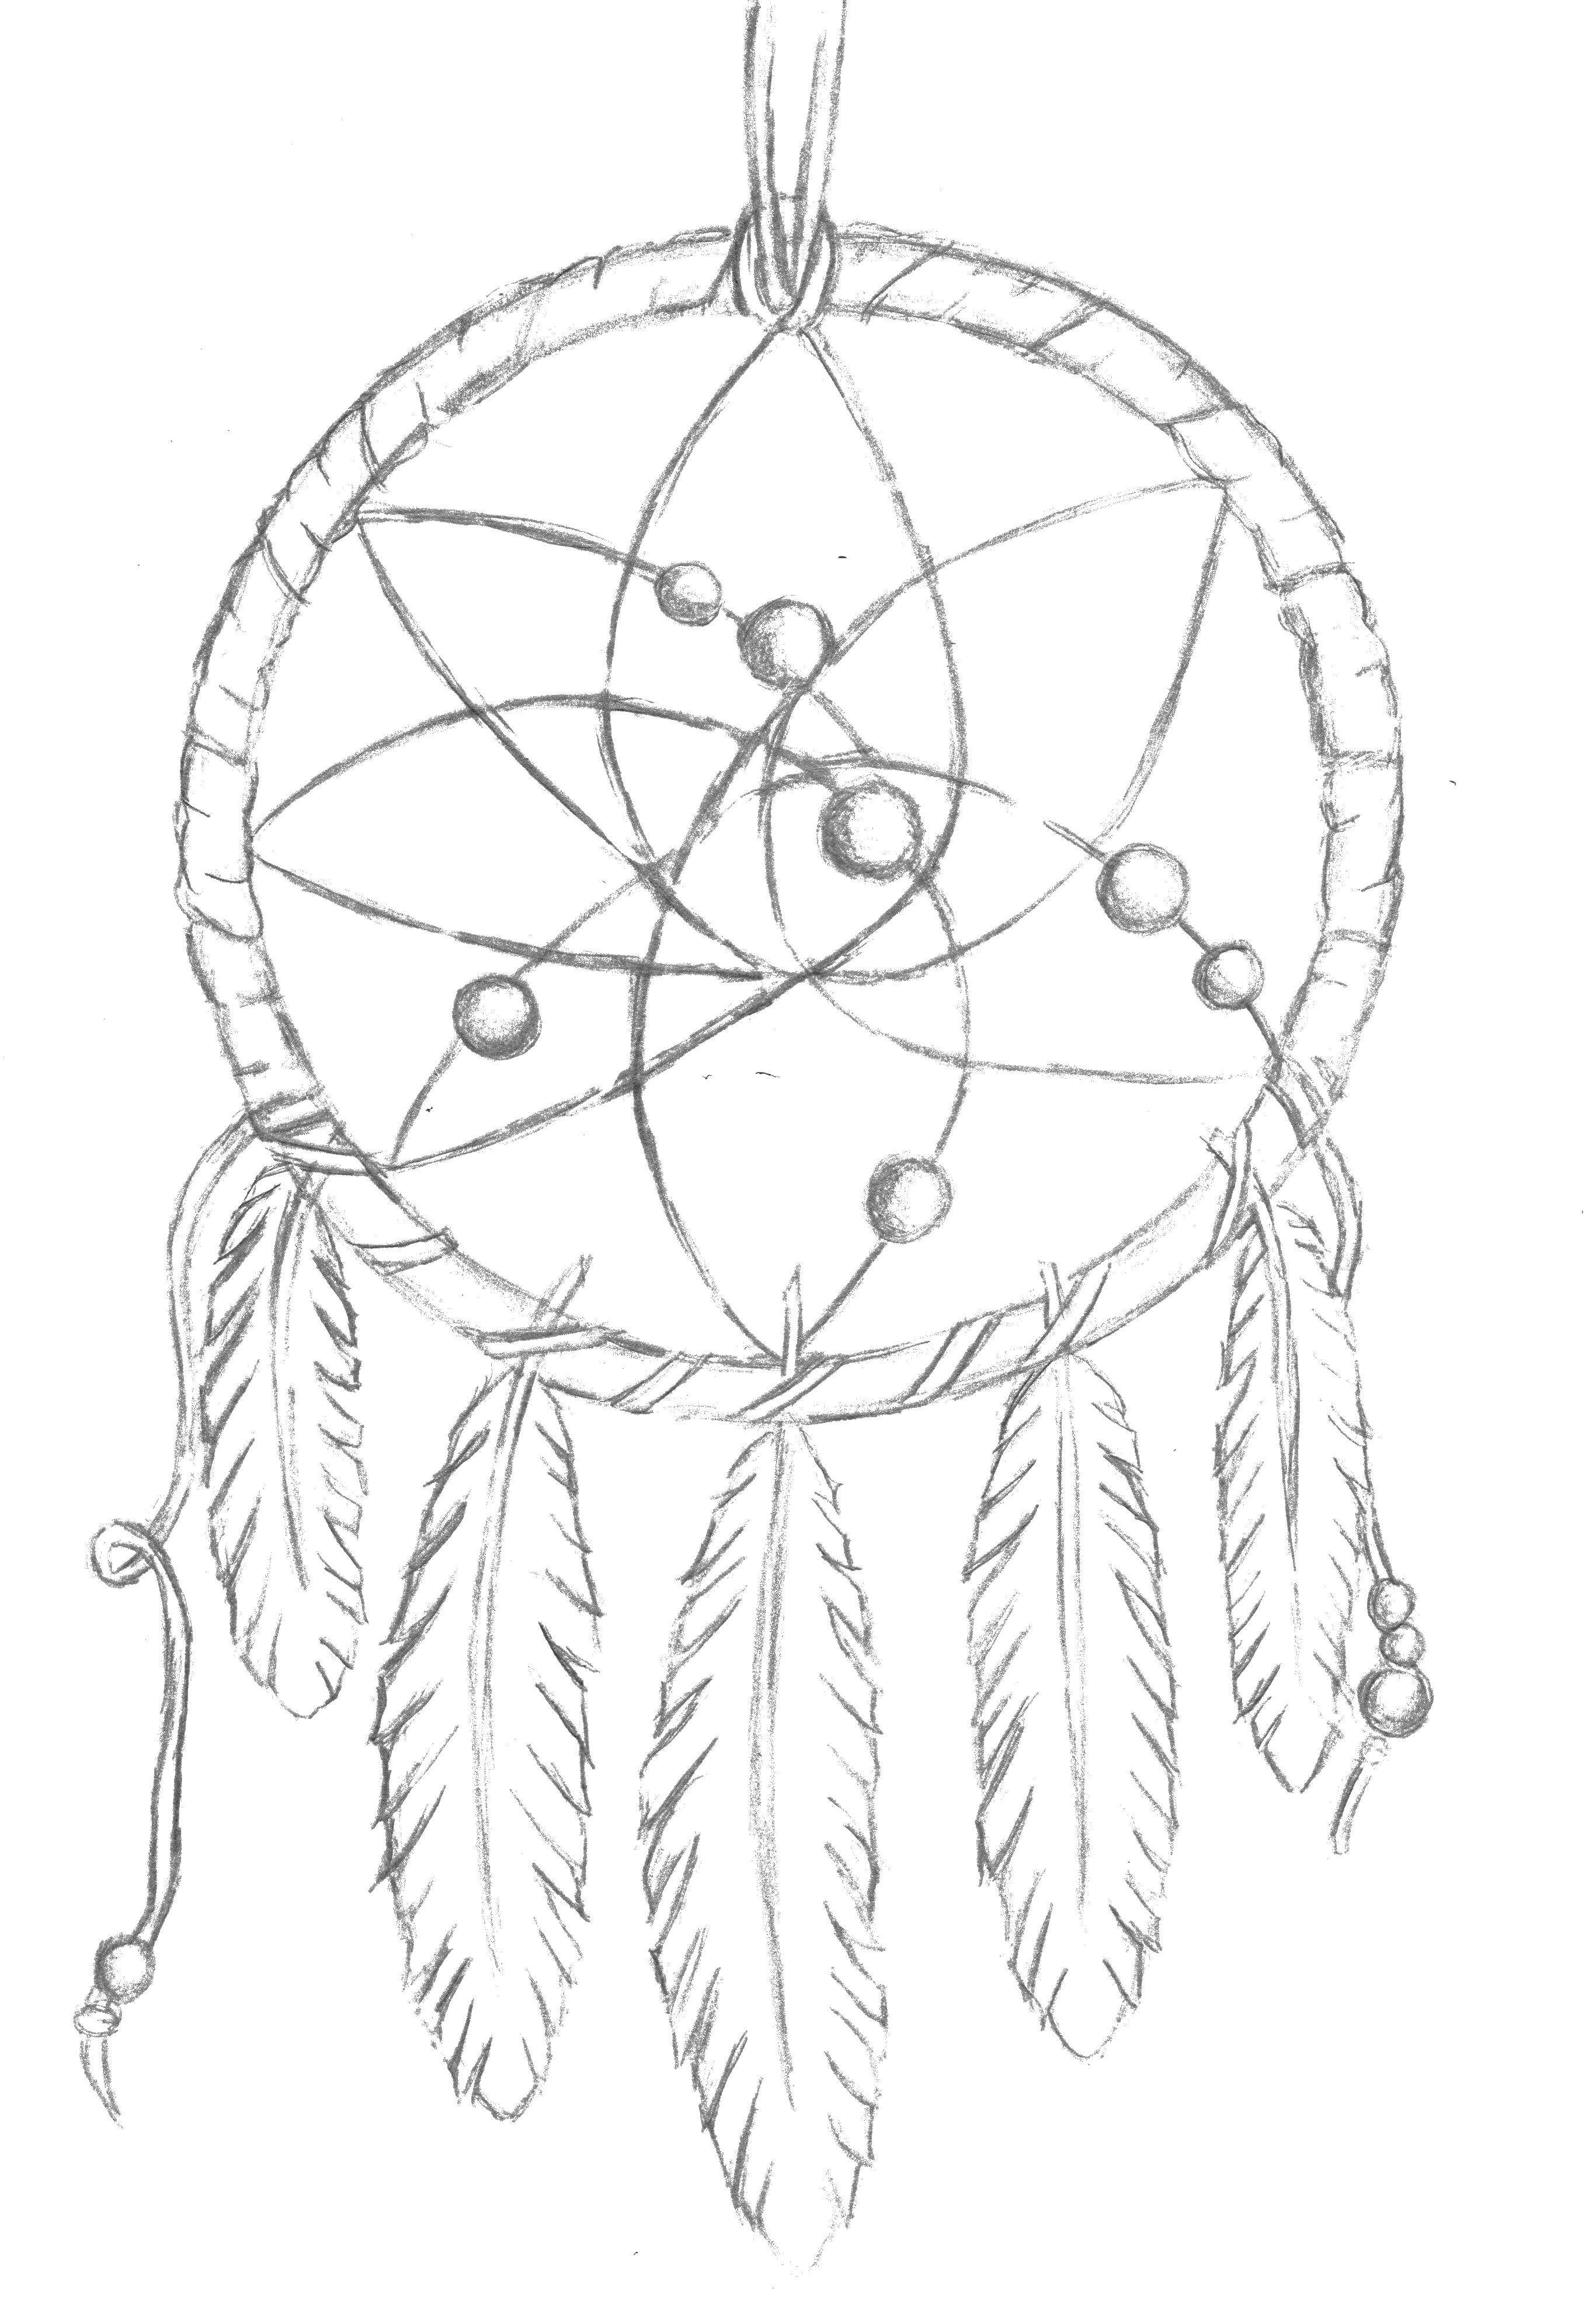 Coloring Dream catcher with feathers. Category The Indians. Tags:  catcher, Indians.